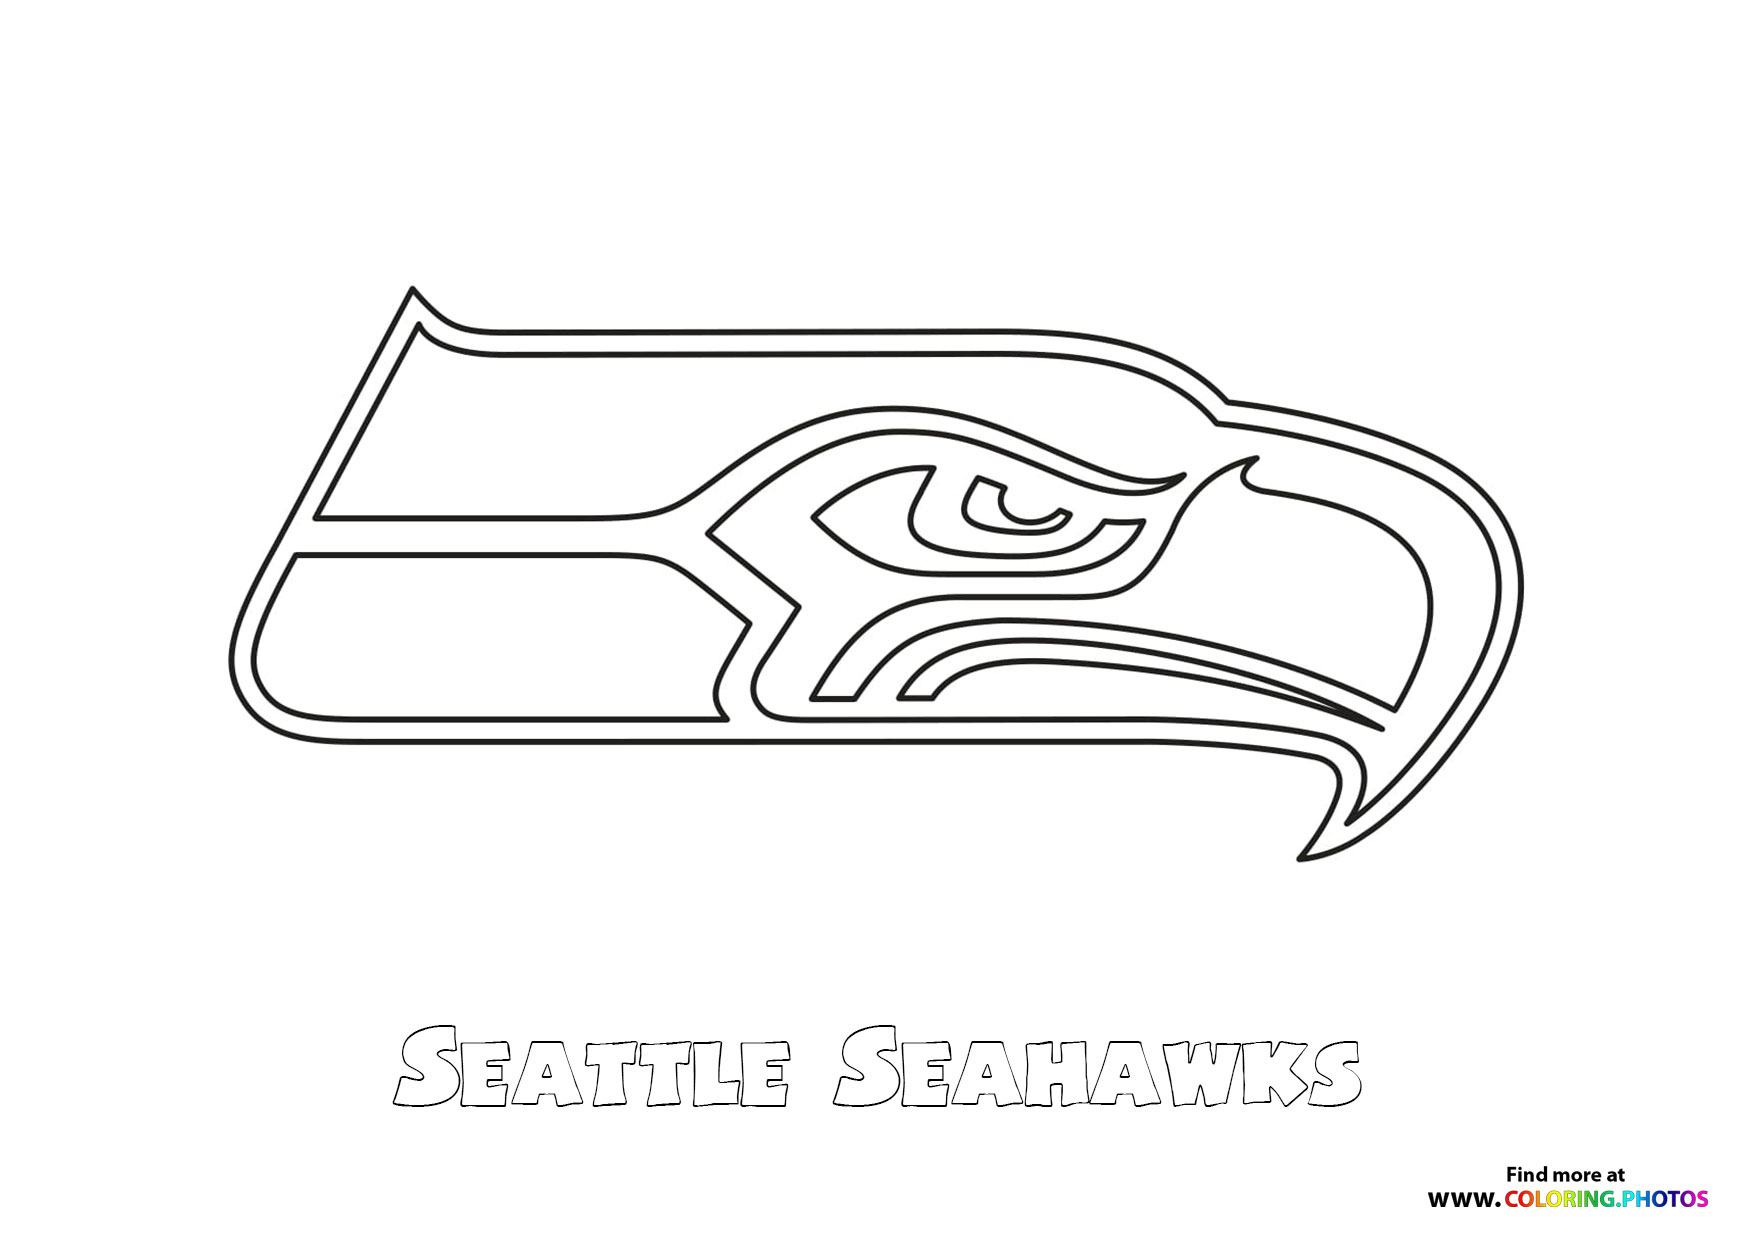 Seattle Seahawks Nfl Logo - Coloring Pages For Kids throughout Free Printable Seahawks Coloring Pages